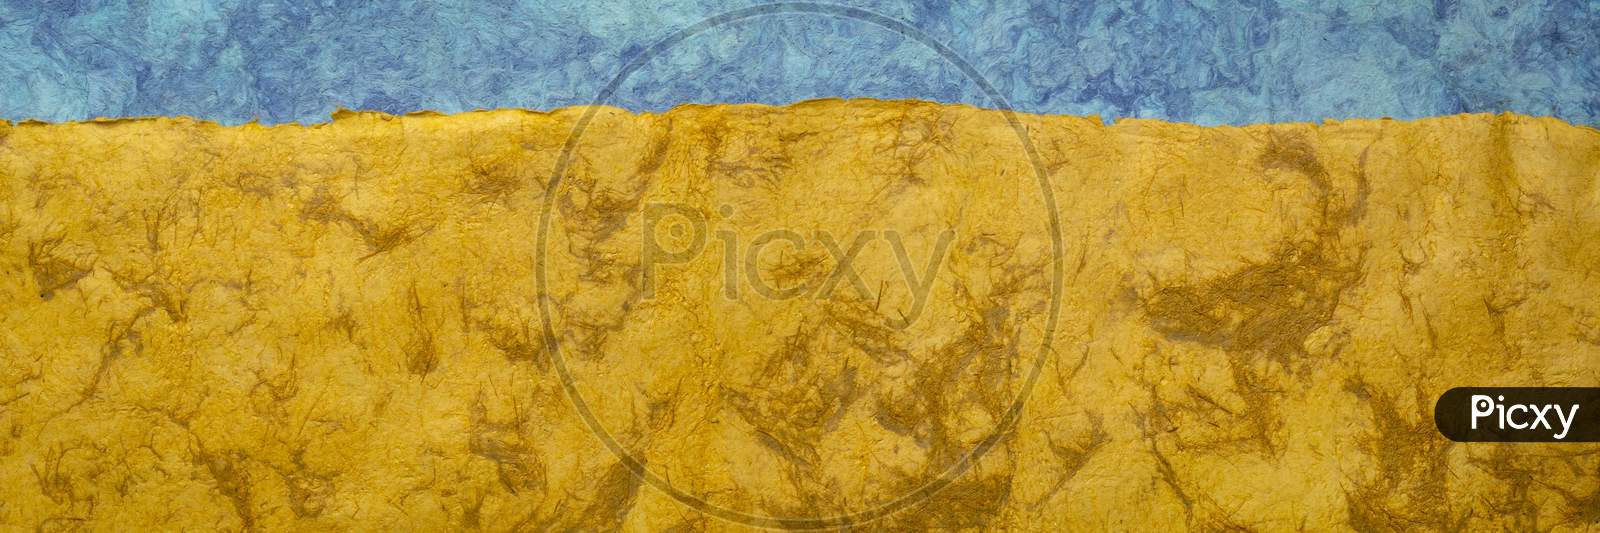 Blue And Gold Panorama - Abstract Landscape Created With Colorful Sheets Of Handmade Textured Paper